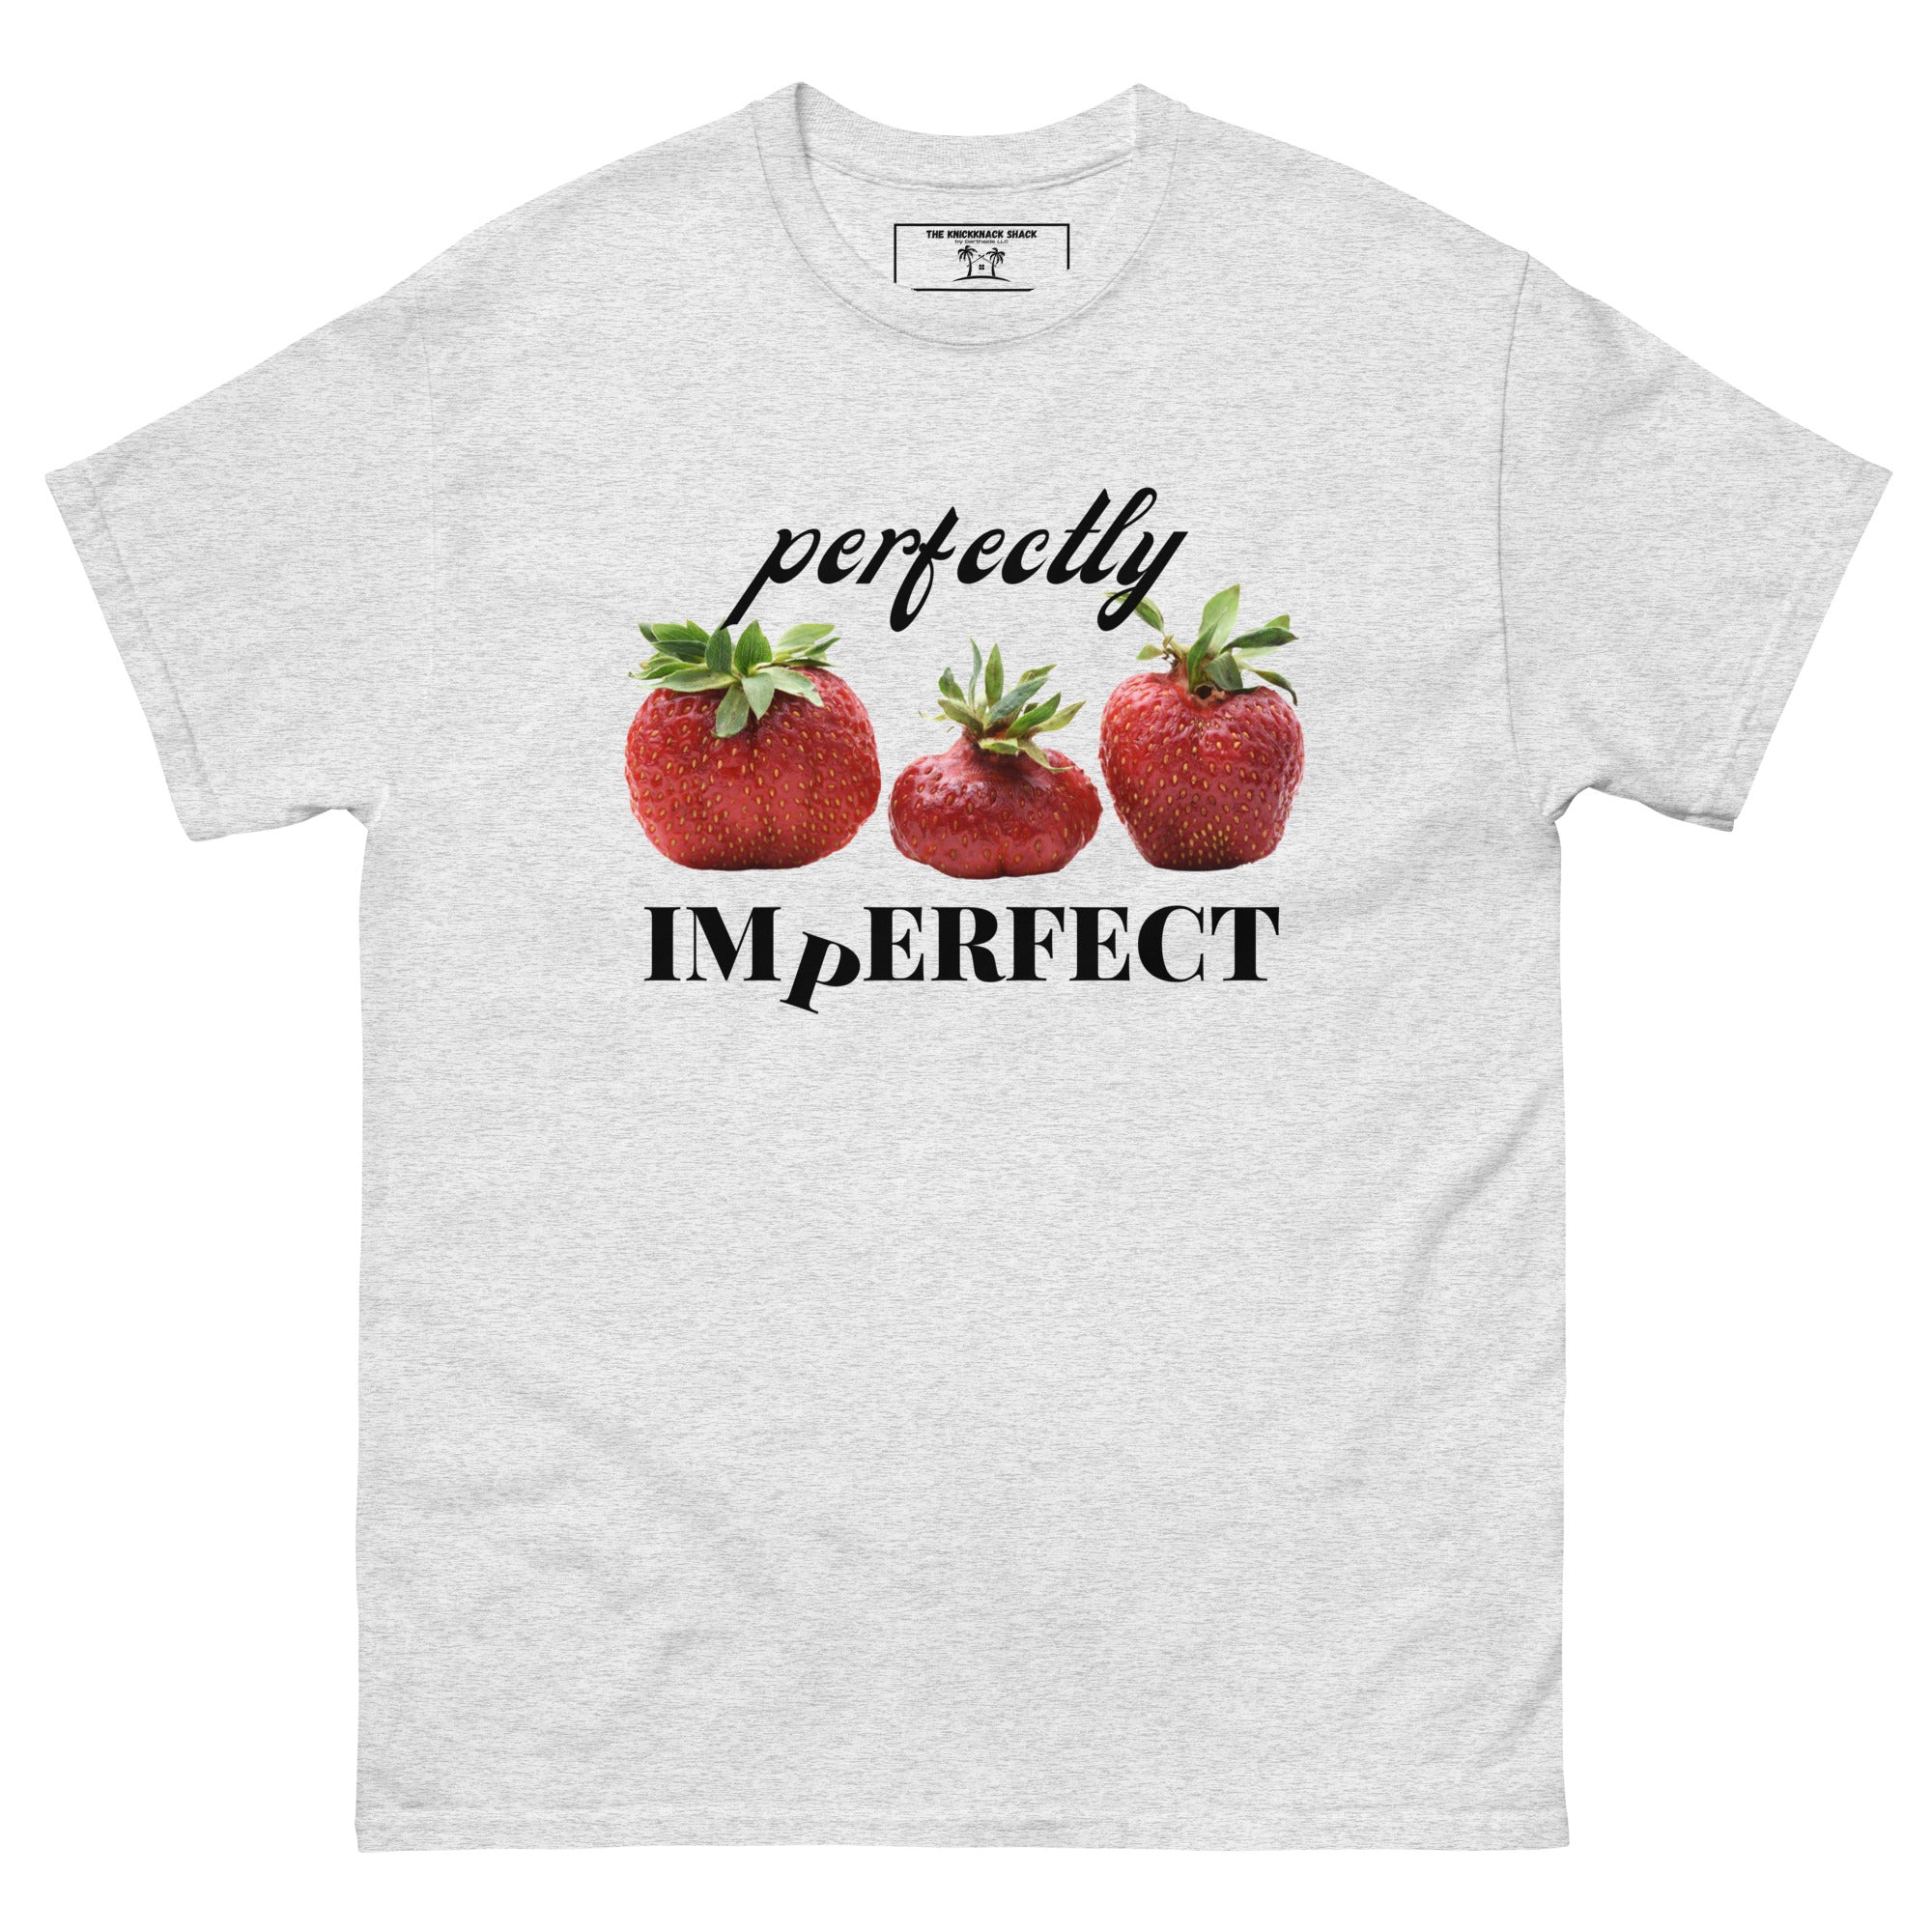 Classic Tee - Perfectly Imperfect (Style 1) (Light Colors)